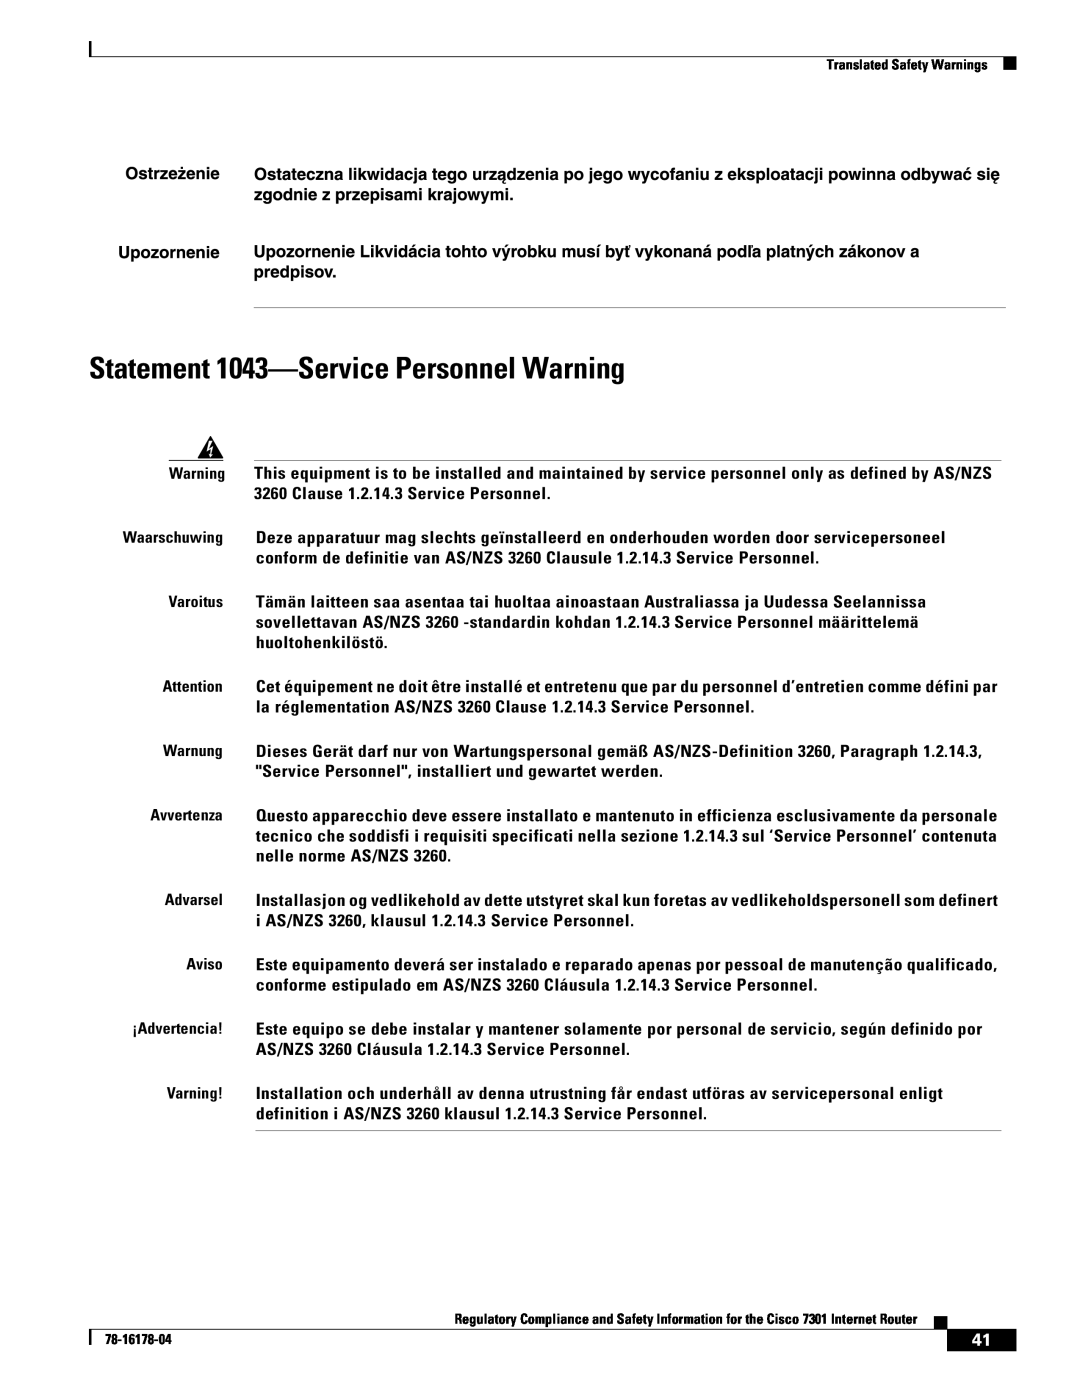 Cisco Systems CISCO7301 manual Statement 1043-Service Personnel Warning 